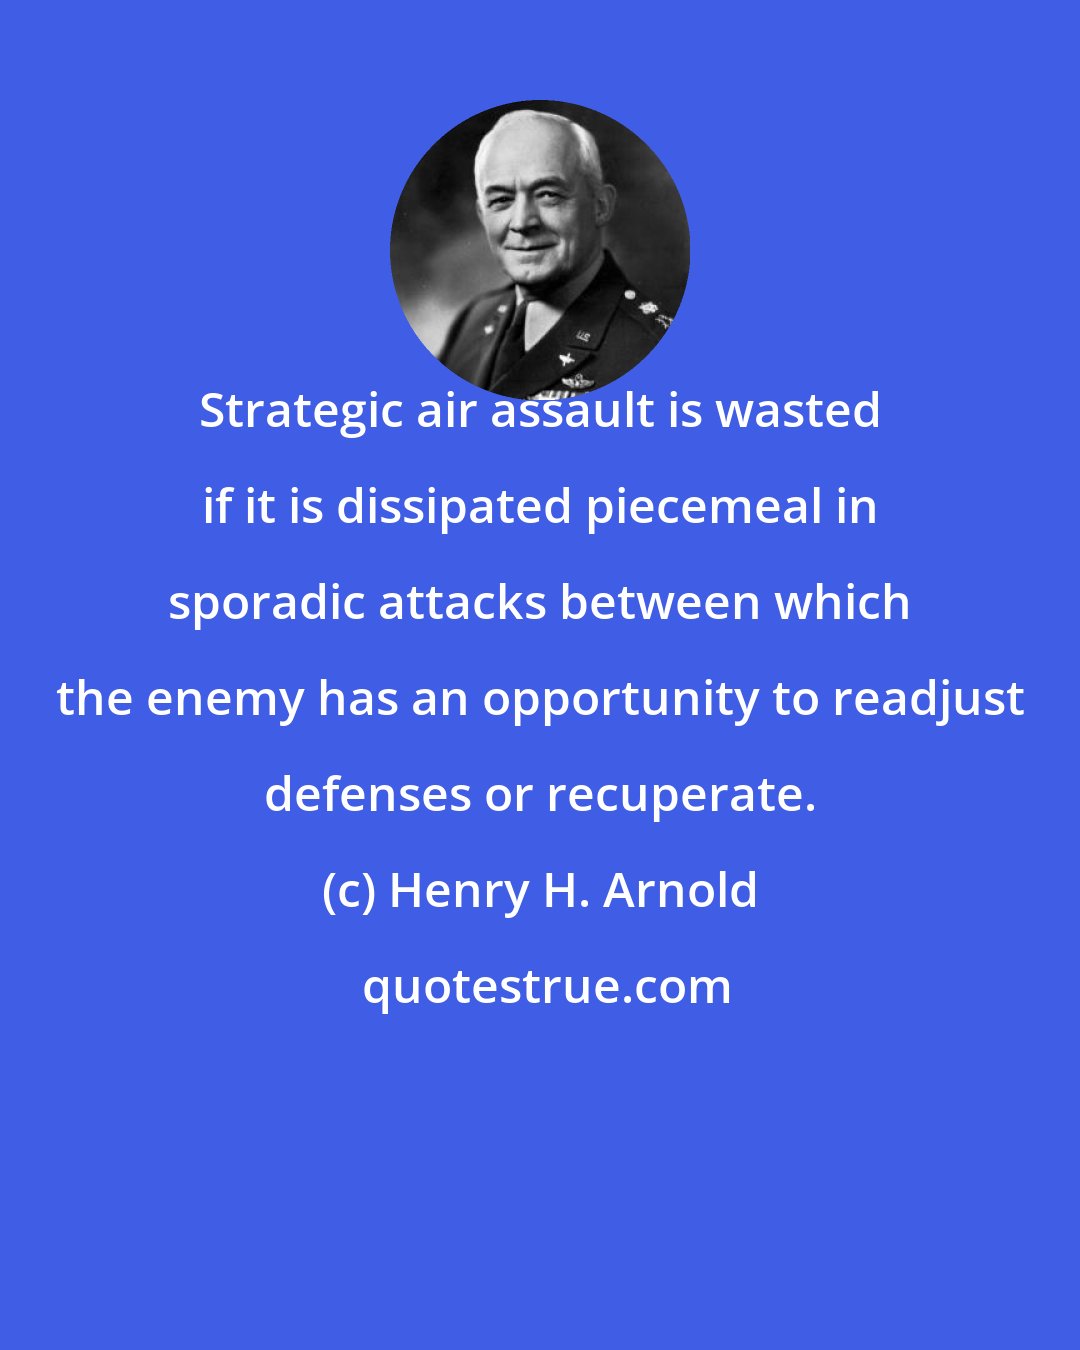 Henry H. Arnold: Strategic air assault is wasted if it is dissipated piecemeal in sporadic attacks between which the enemy has an opportunity to readjust defenses or recuperate.